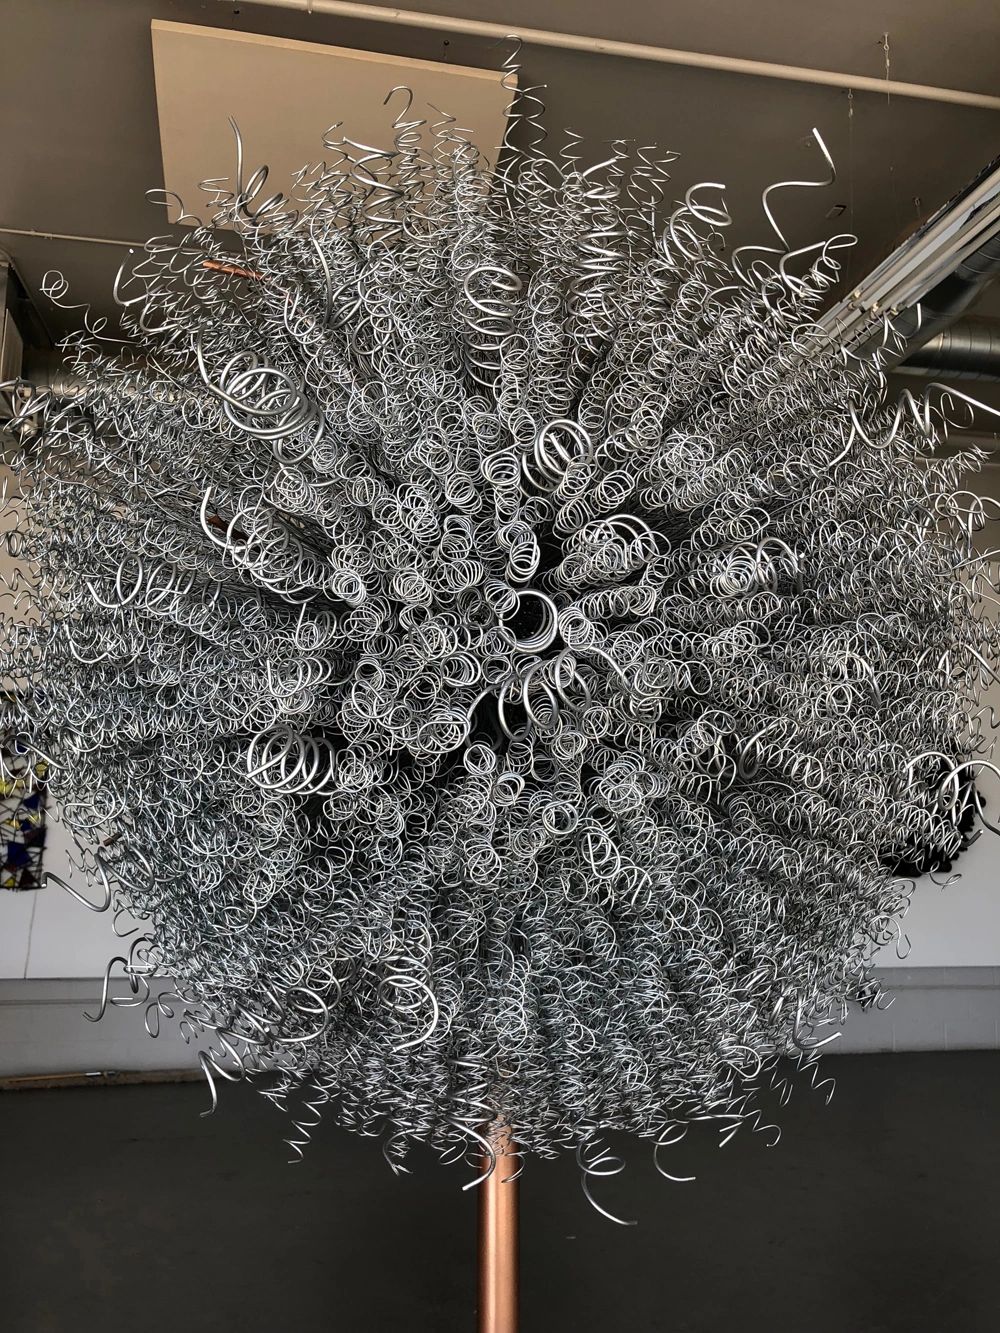 "Brio" sculpture made of hundreds of hand coiled steel wires radiating from a central point.